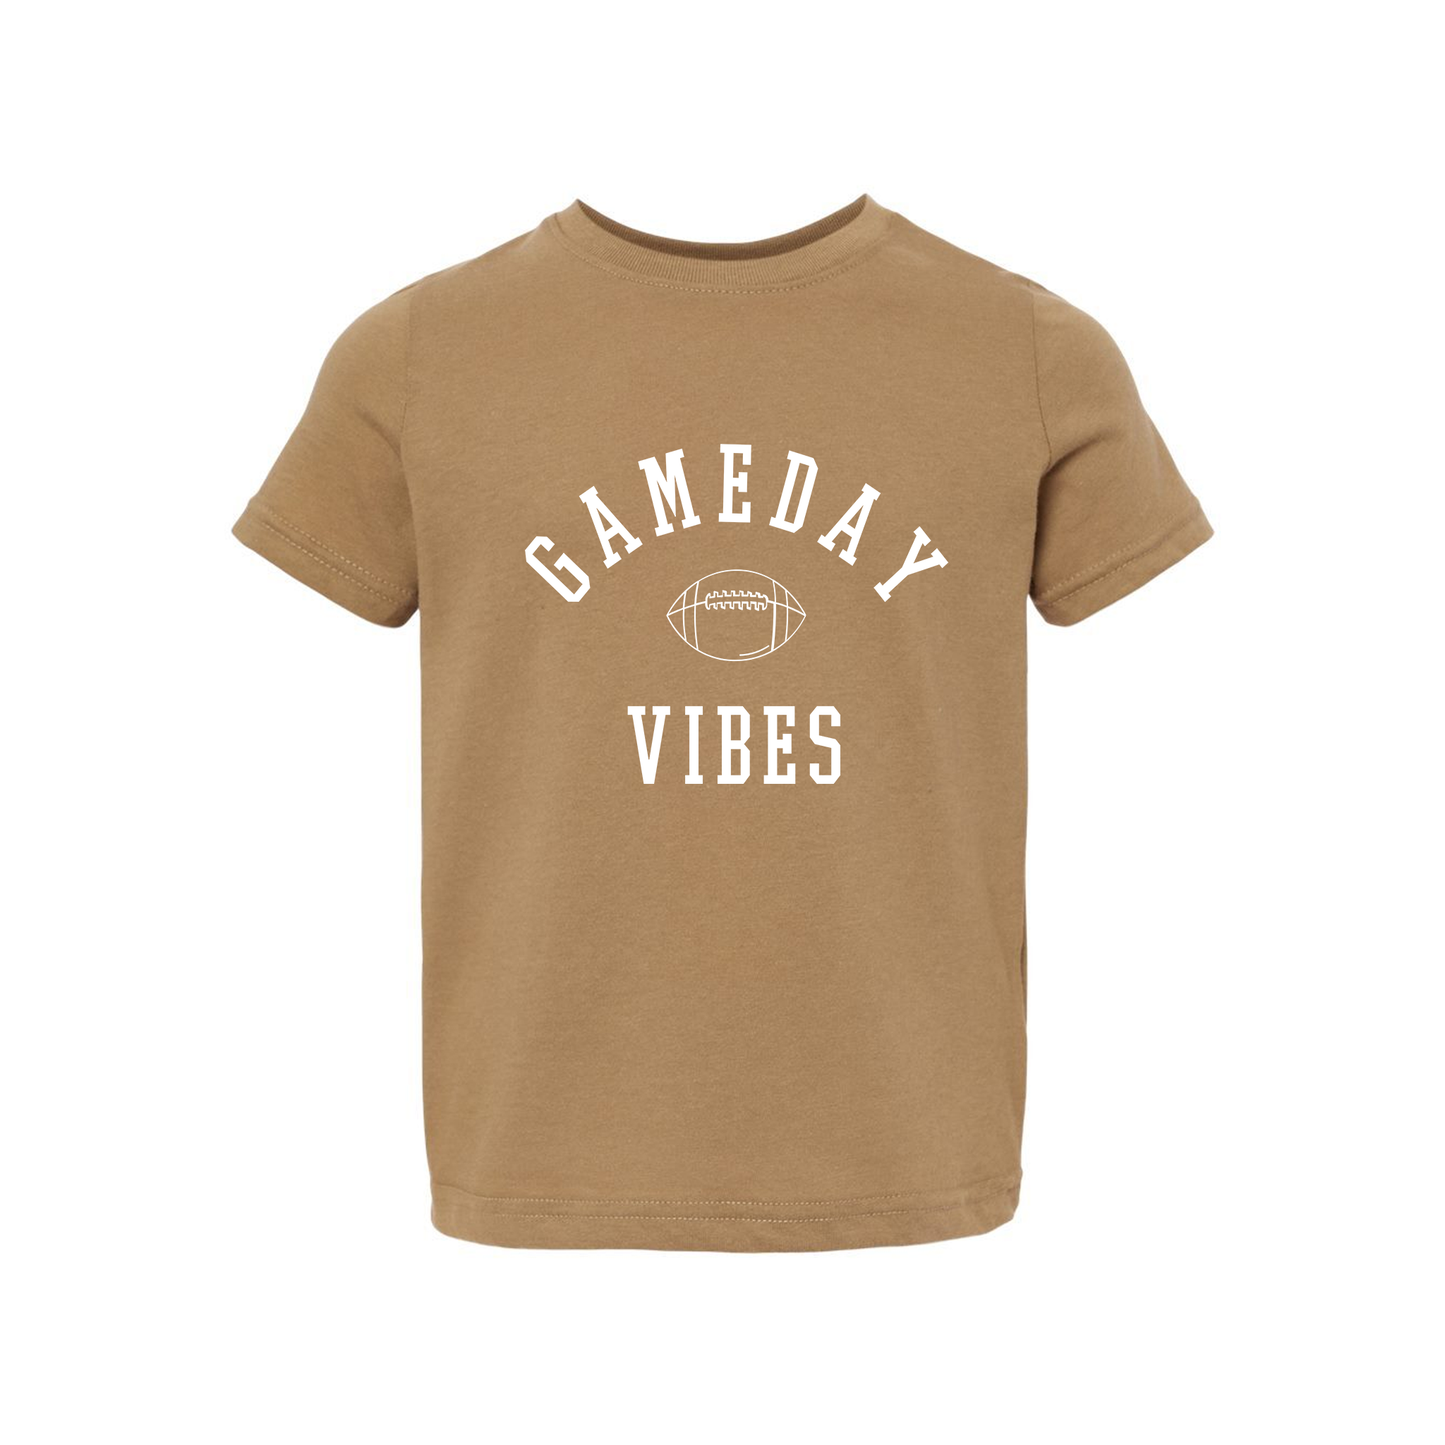 Gameday Vibes (White) - Kids Tee (Coyote Brown)